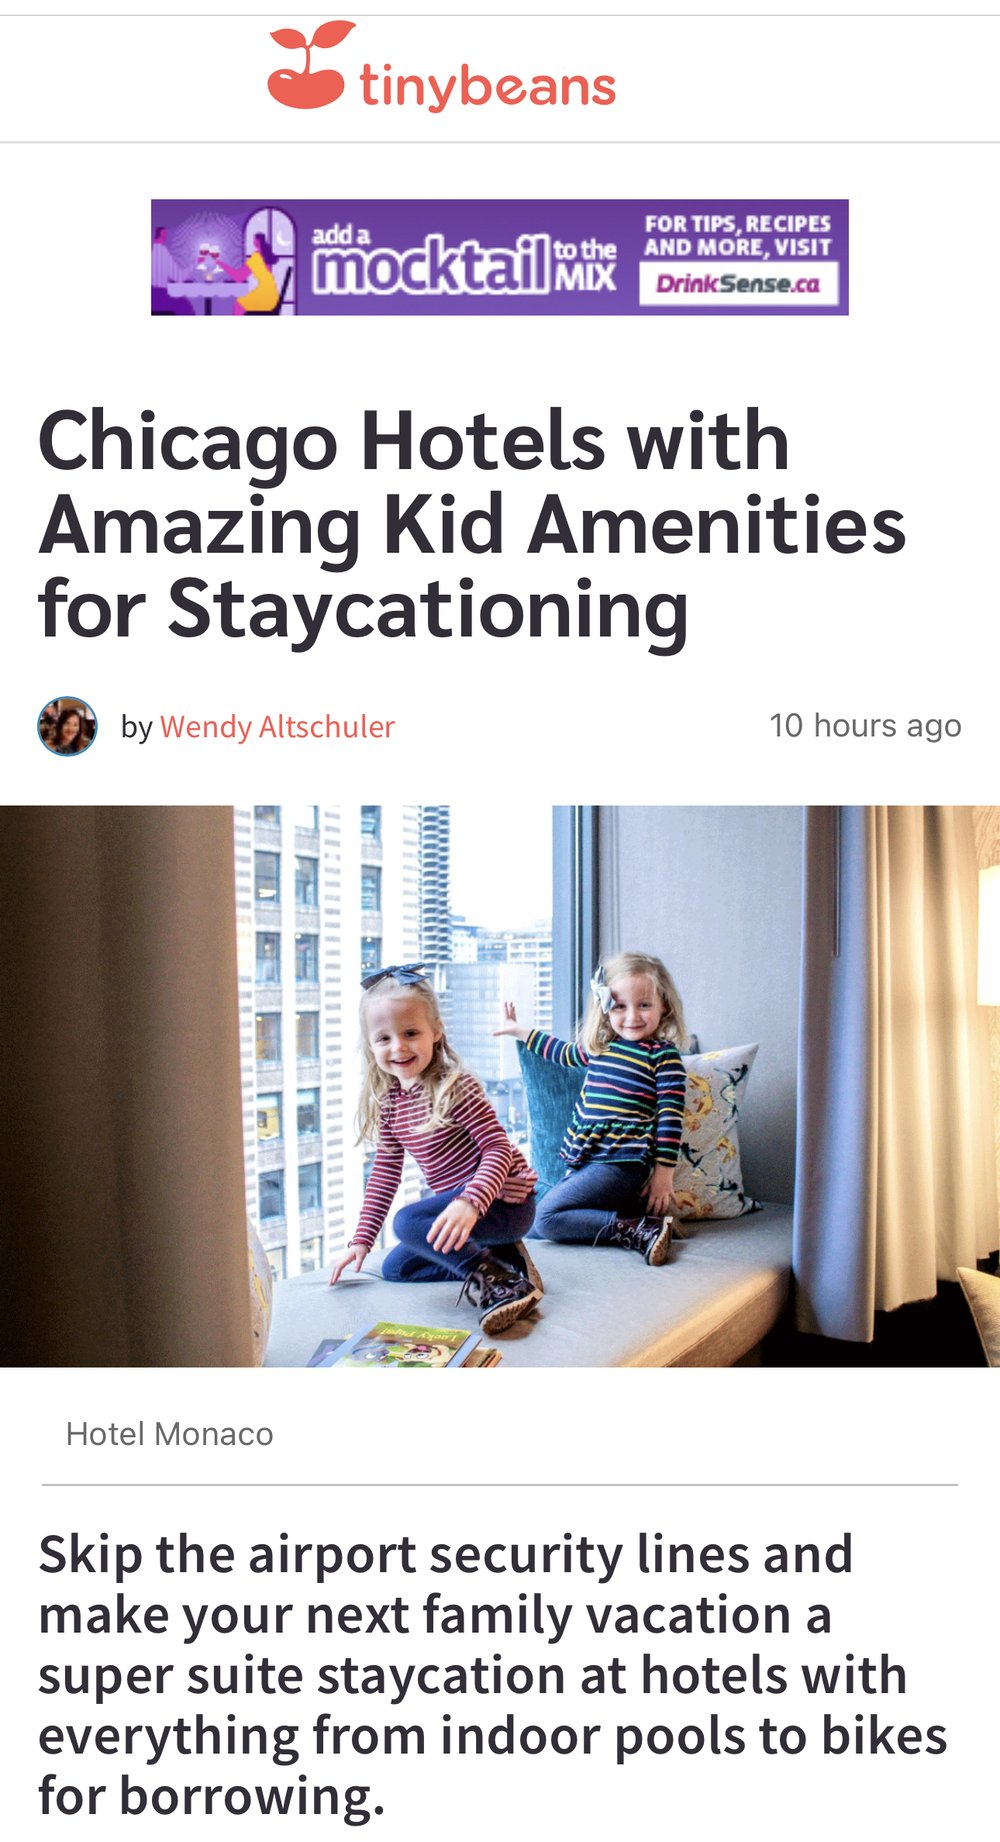 Chicago Hotels with Amazing Kid Amenities for Staycationing